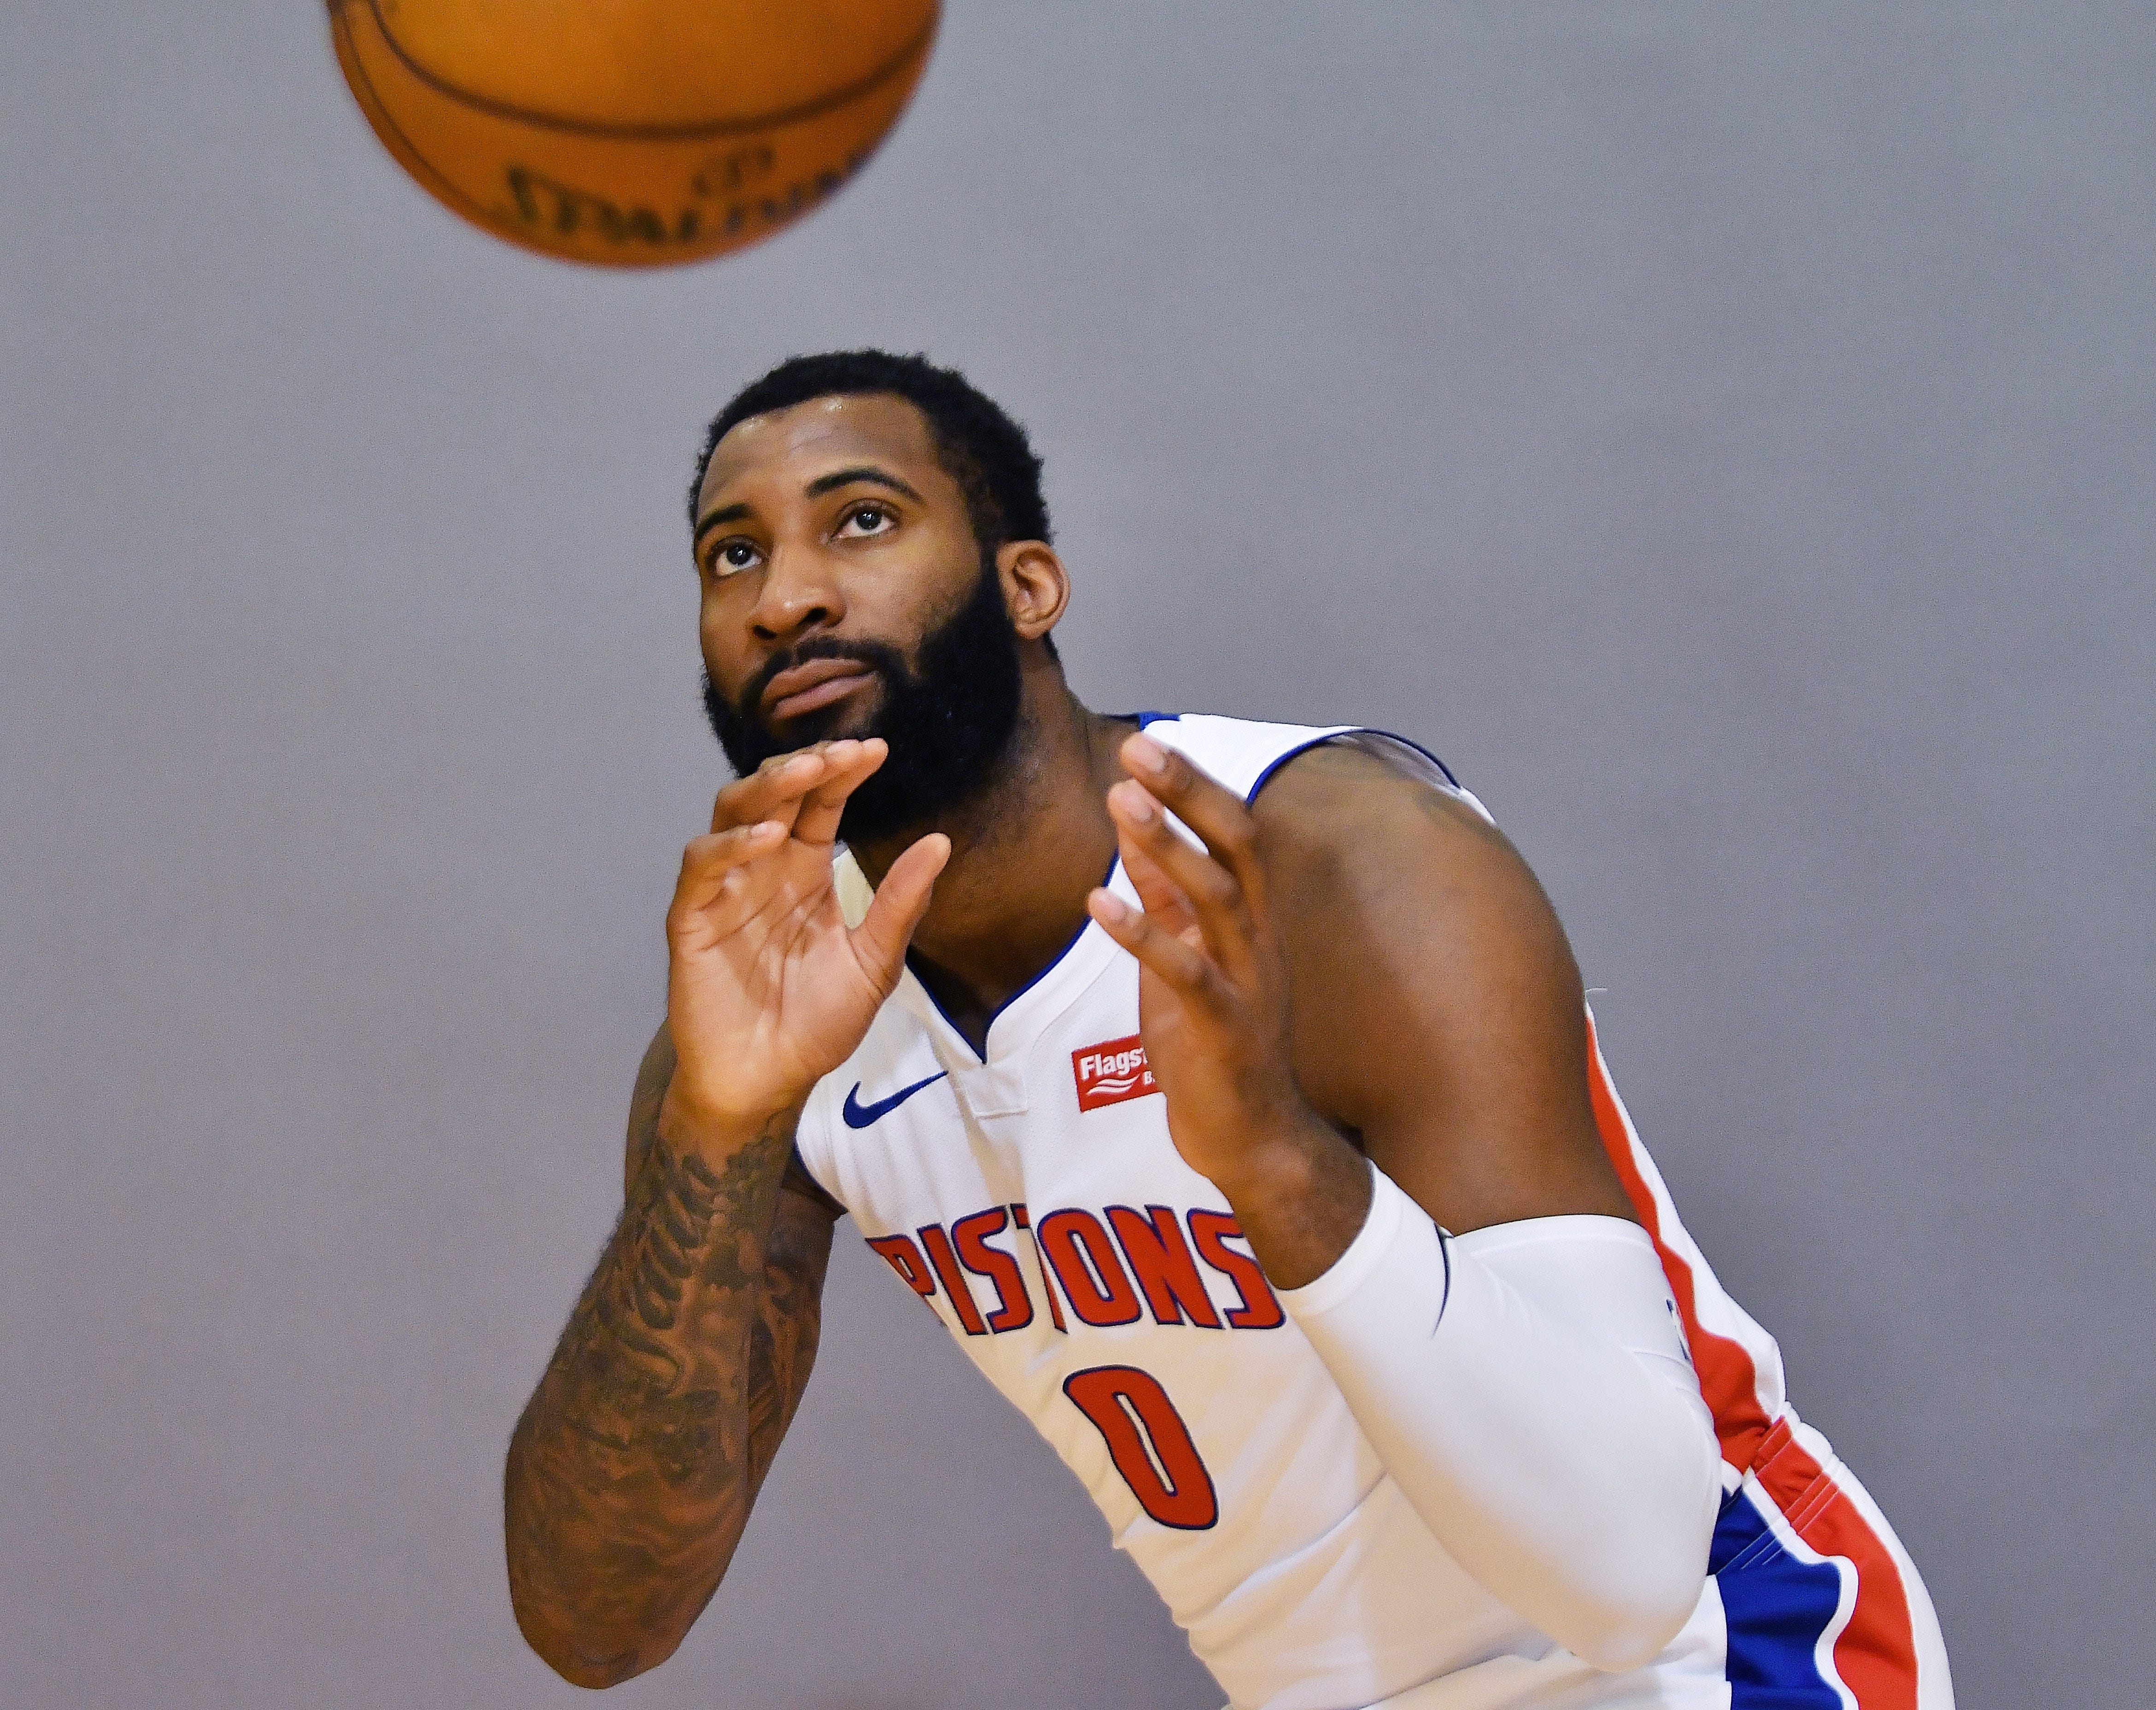 Andre Drummond prepares to catch a pass during his photo shoot.